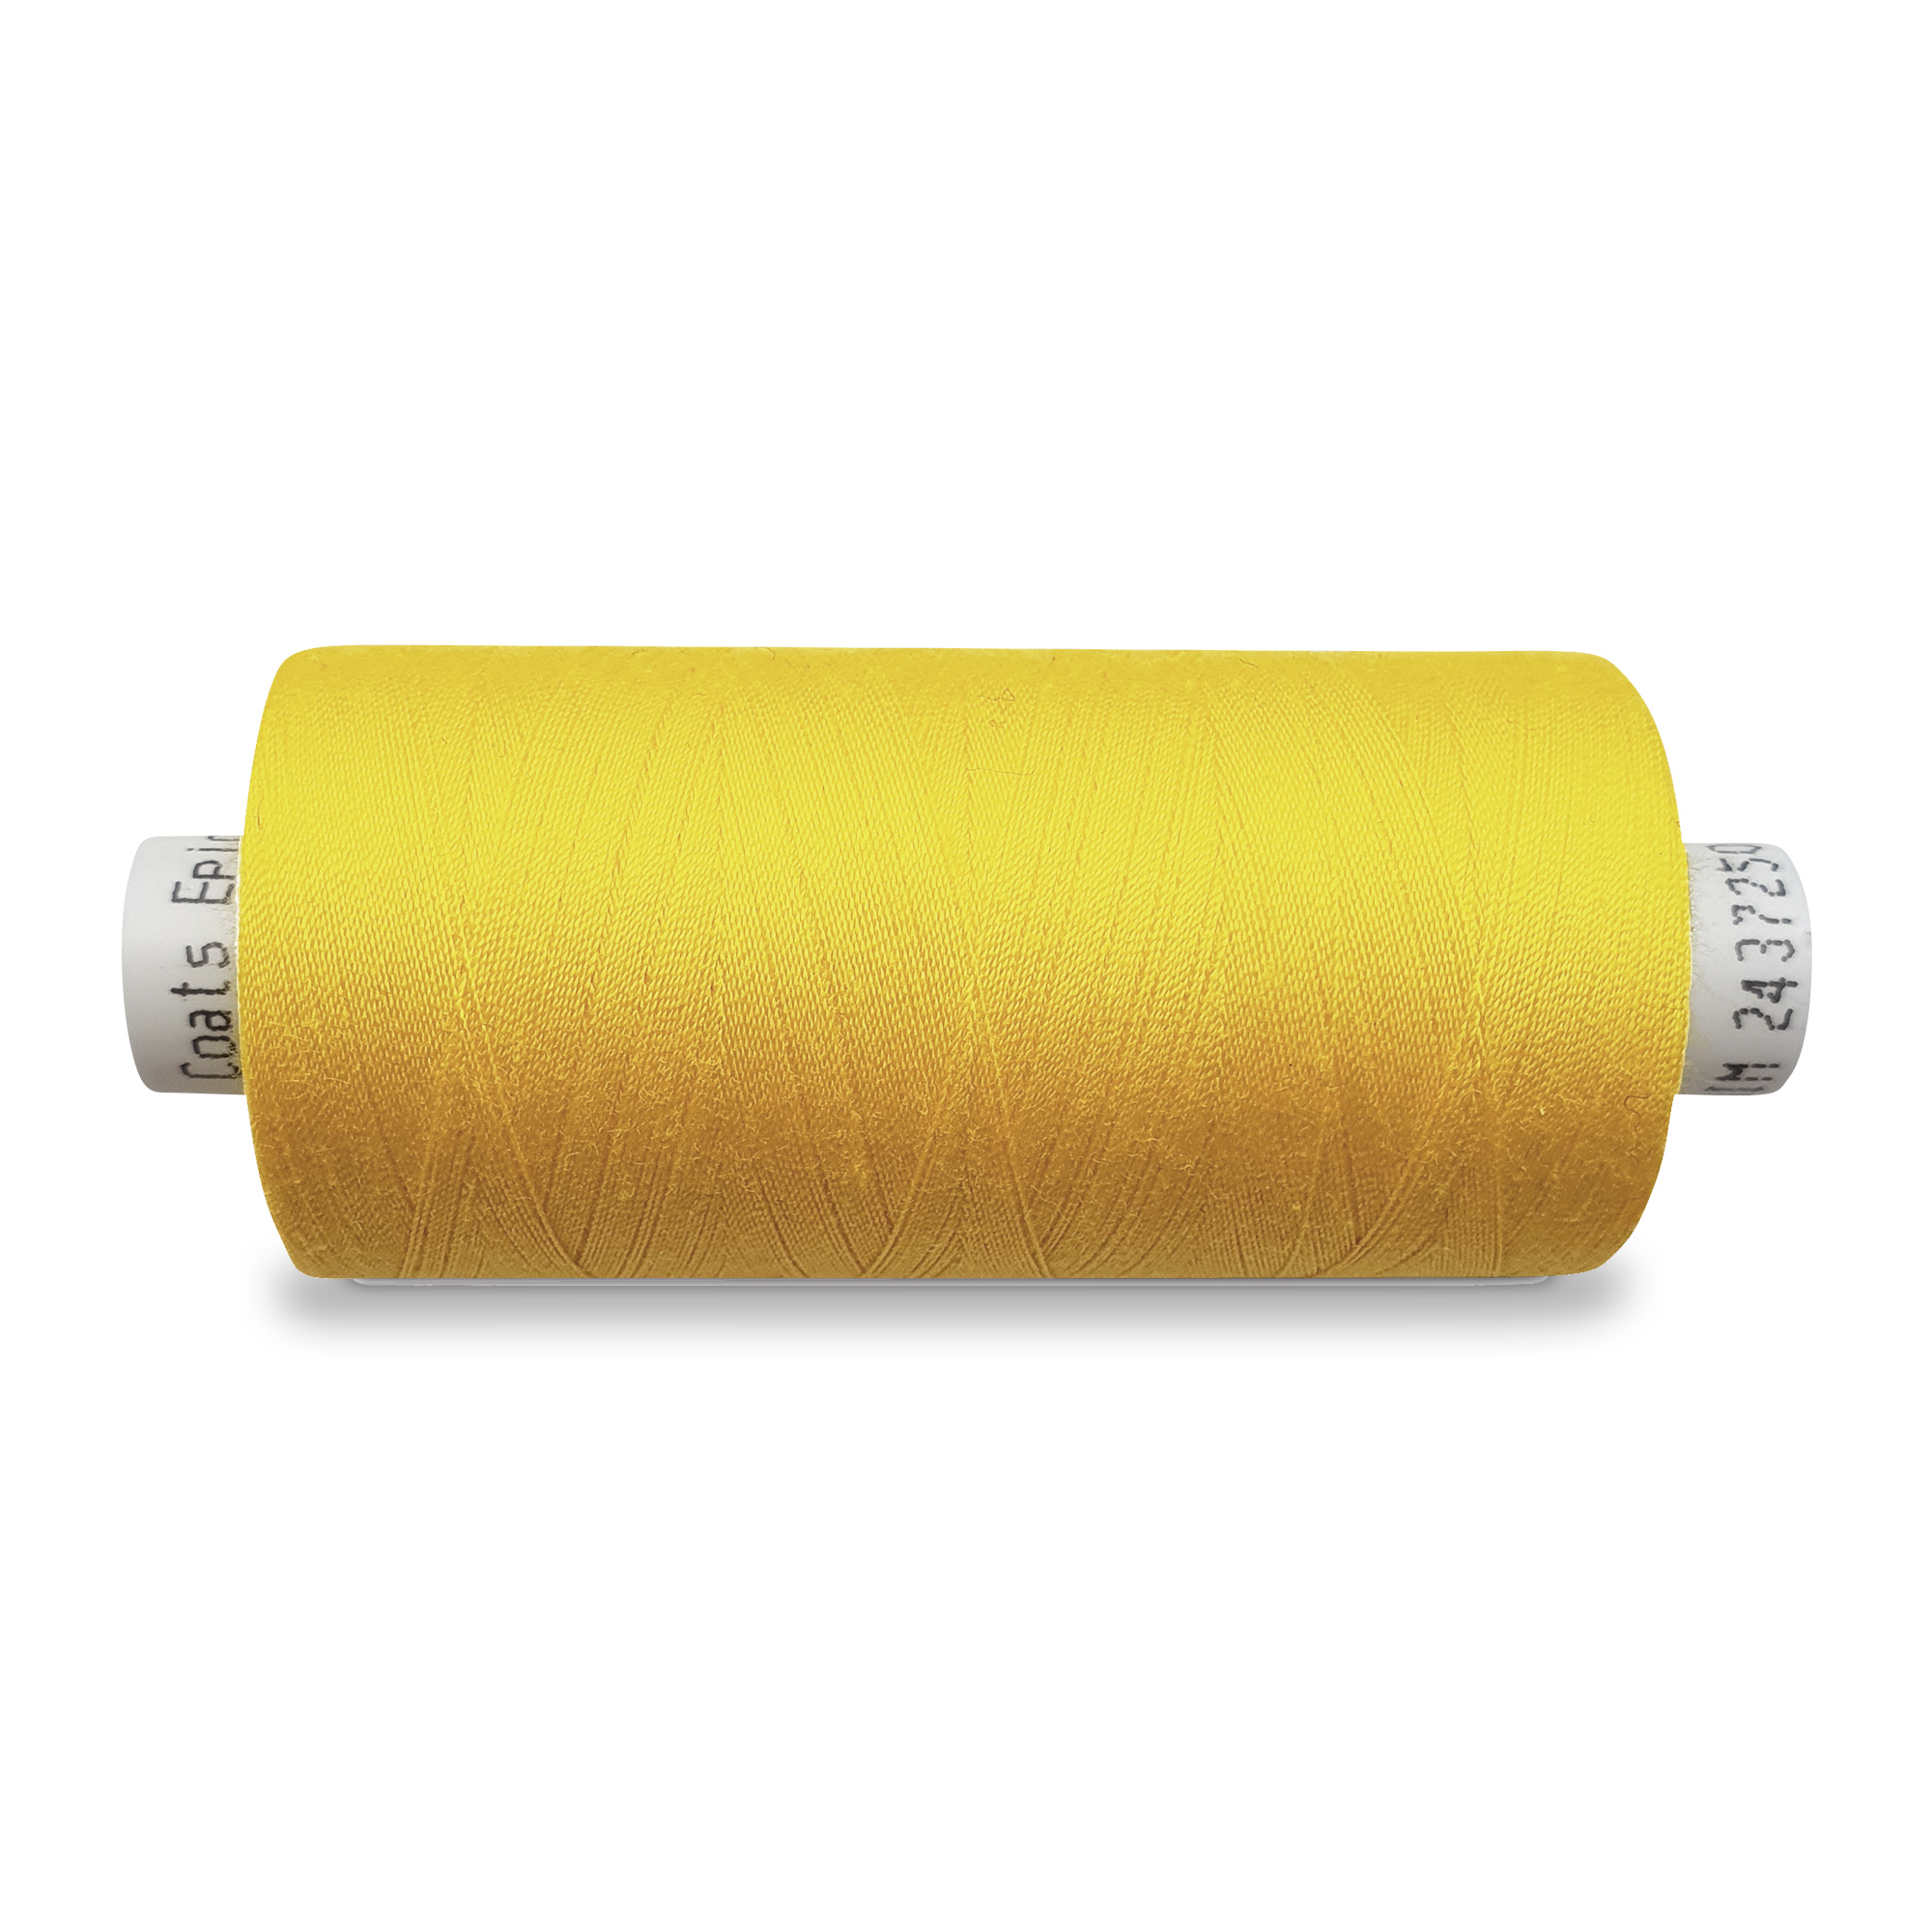 Sewing thread chrome yellow